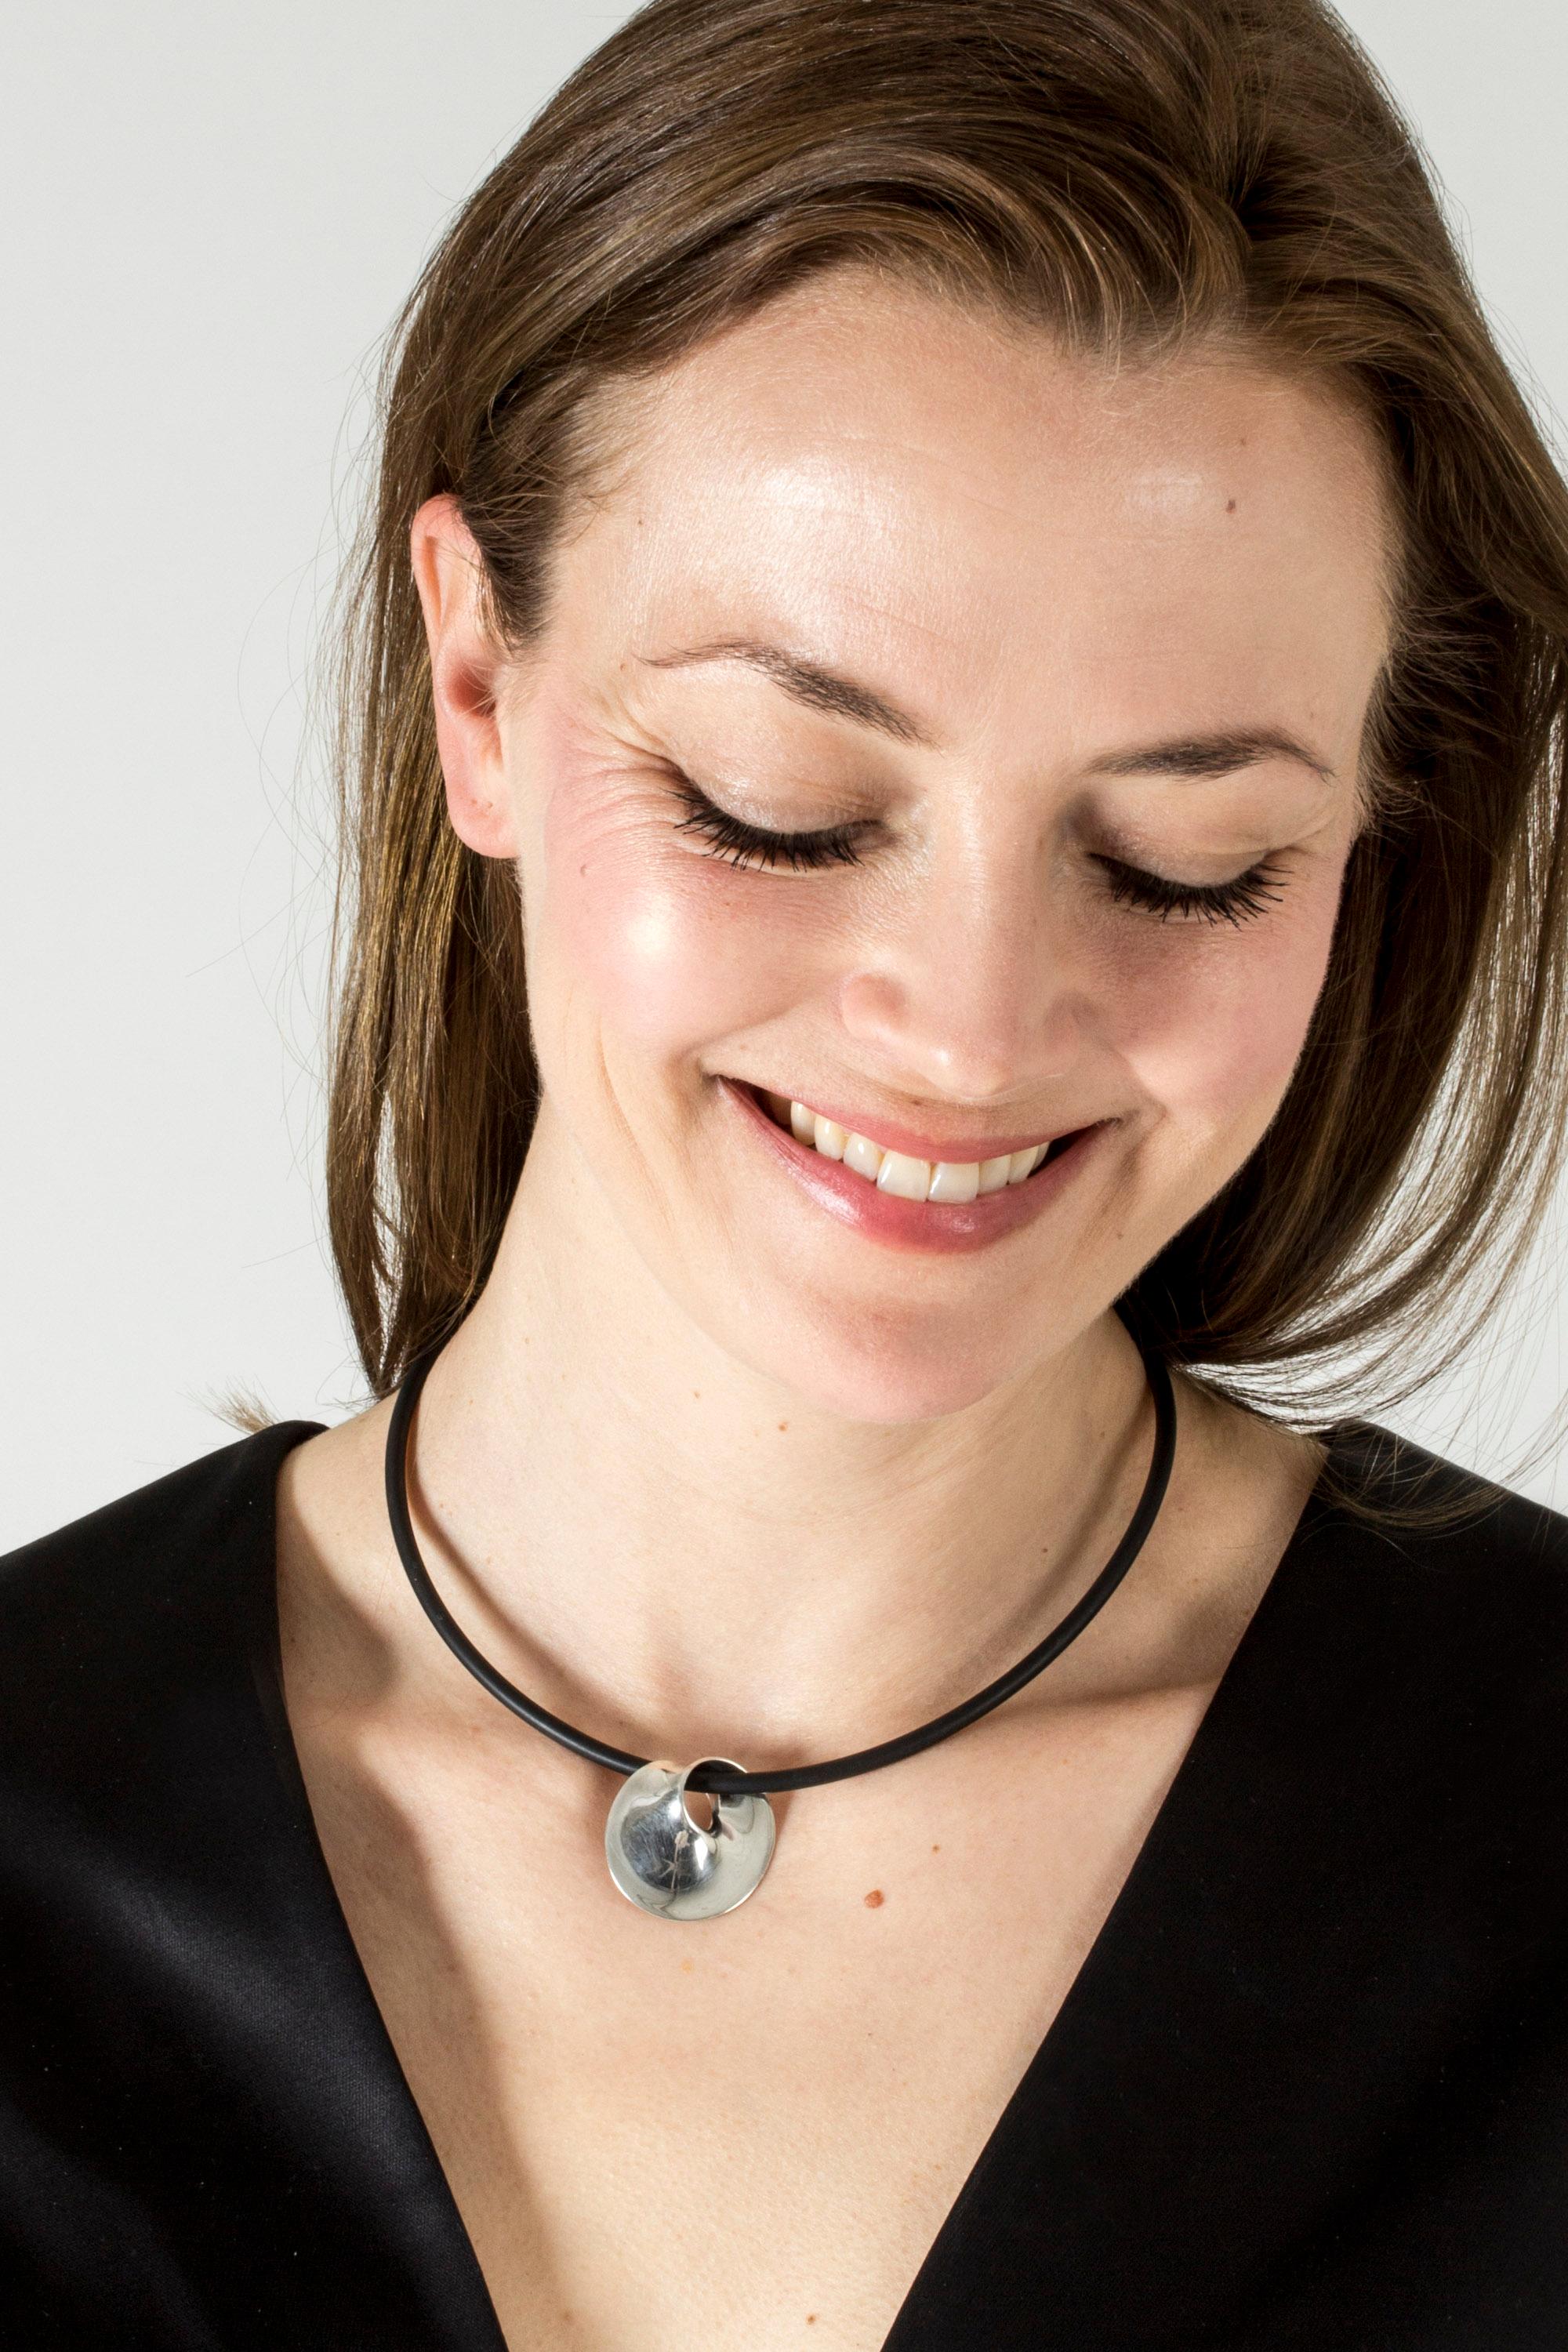 Beautiful “Möbius” pendant by Torun Bülow-Hübe, on a cool rubber neckring. Torun’s classic design is inspired by geometrical forms and expresses an eye-catching harmony. Timeless design that looks great with a casual look.